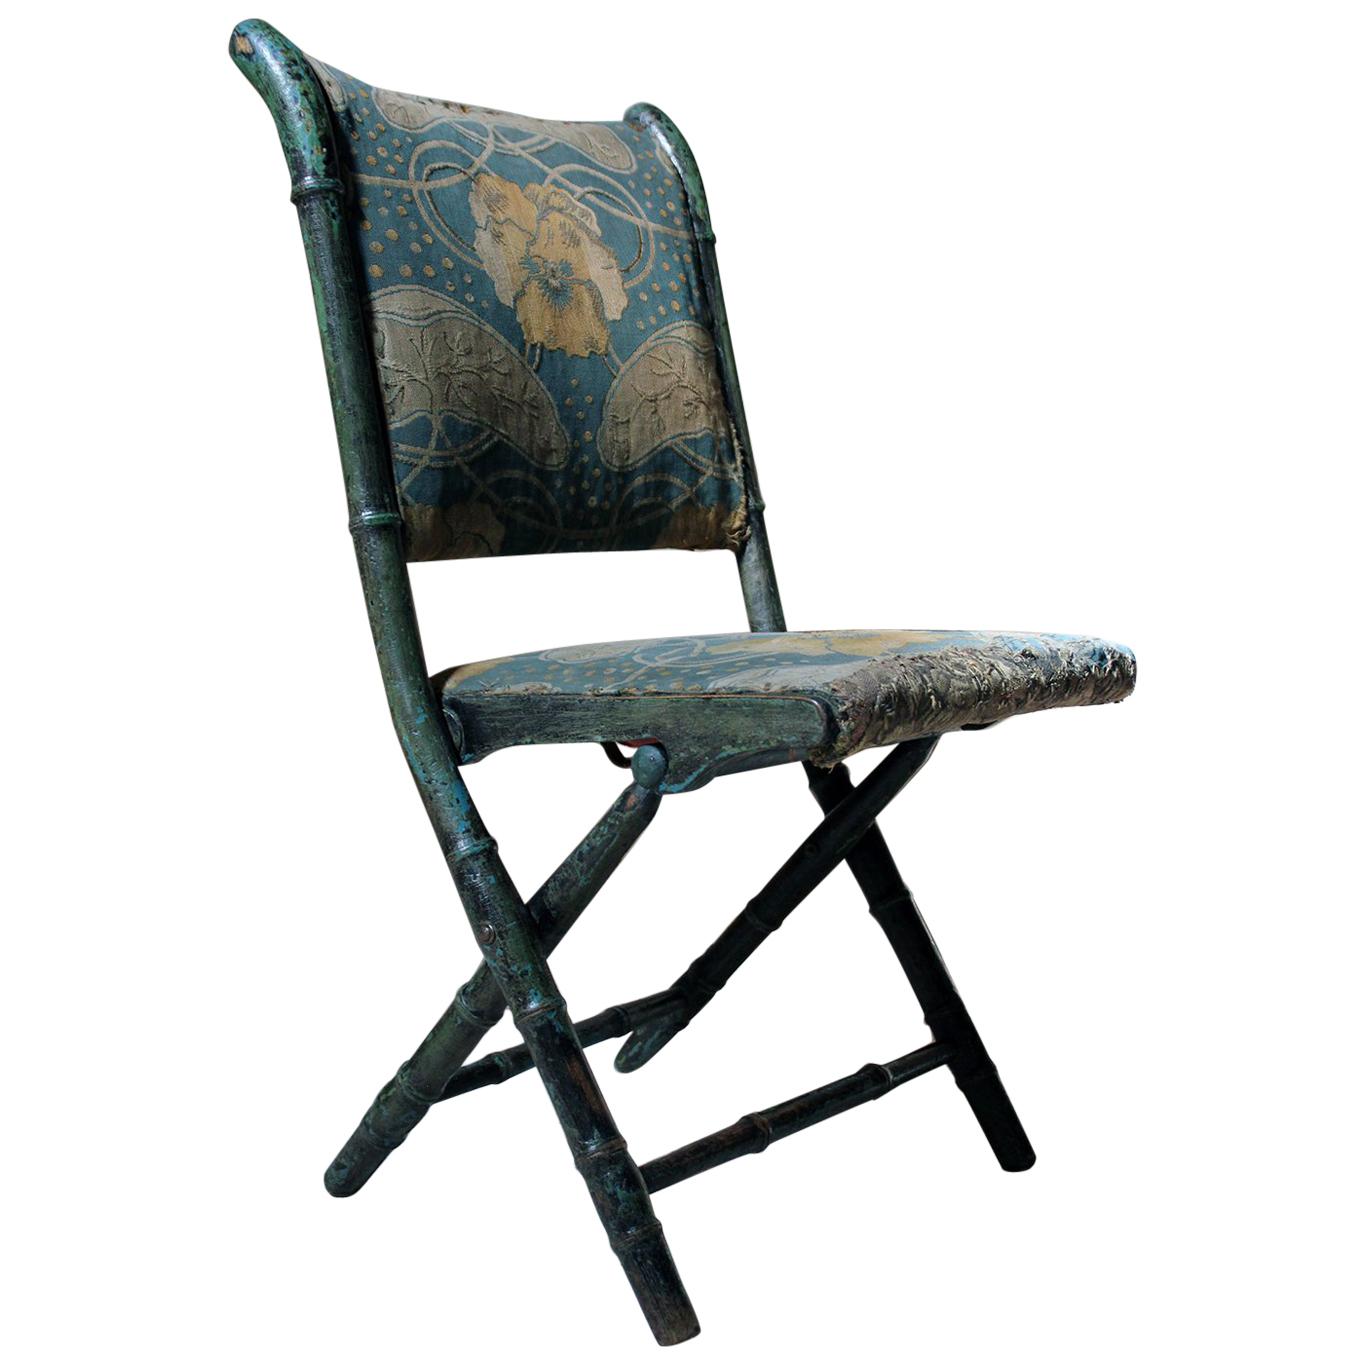 Seltene Regency Periode Faux Bamboo Folding Campaign Chair:: um 1815